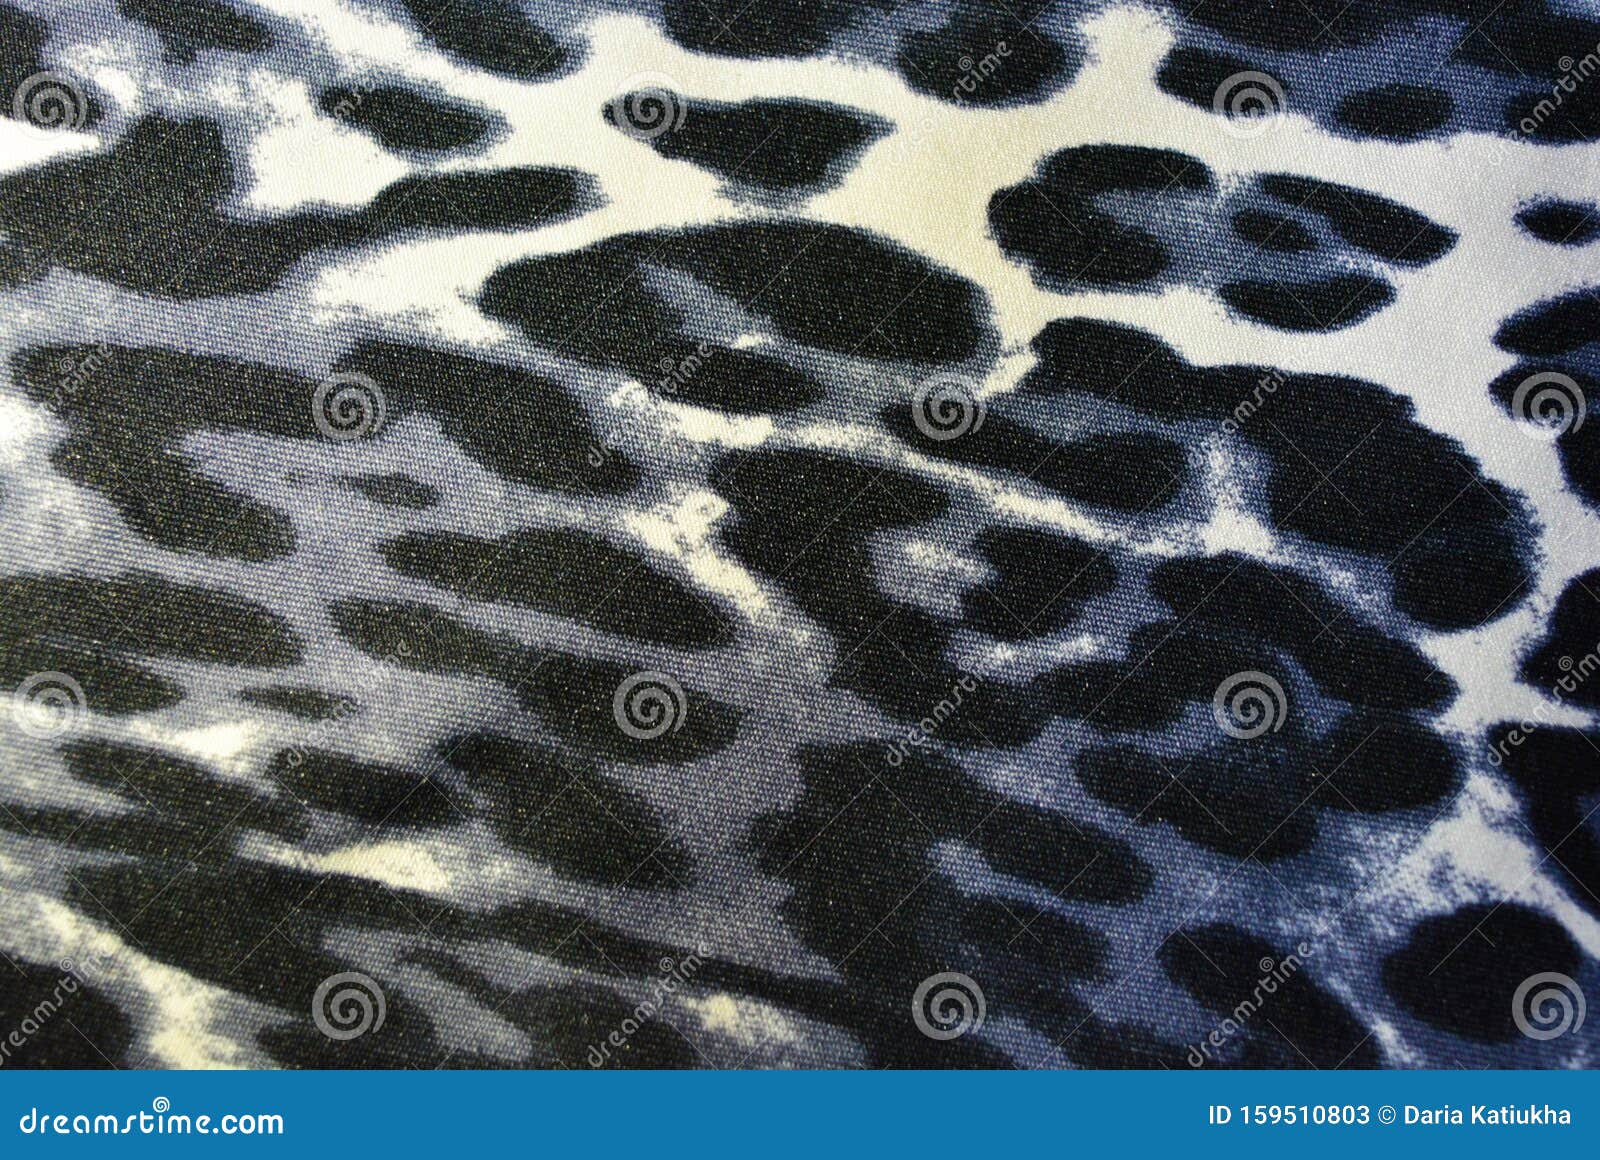 Beautiful Animal Print with Spots, Leopard Pattern and Animal Skin,  White-brown with Gray Spots. Stock Image - Image of panther, leather:  159510803